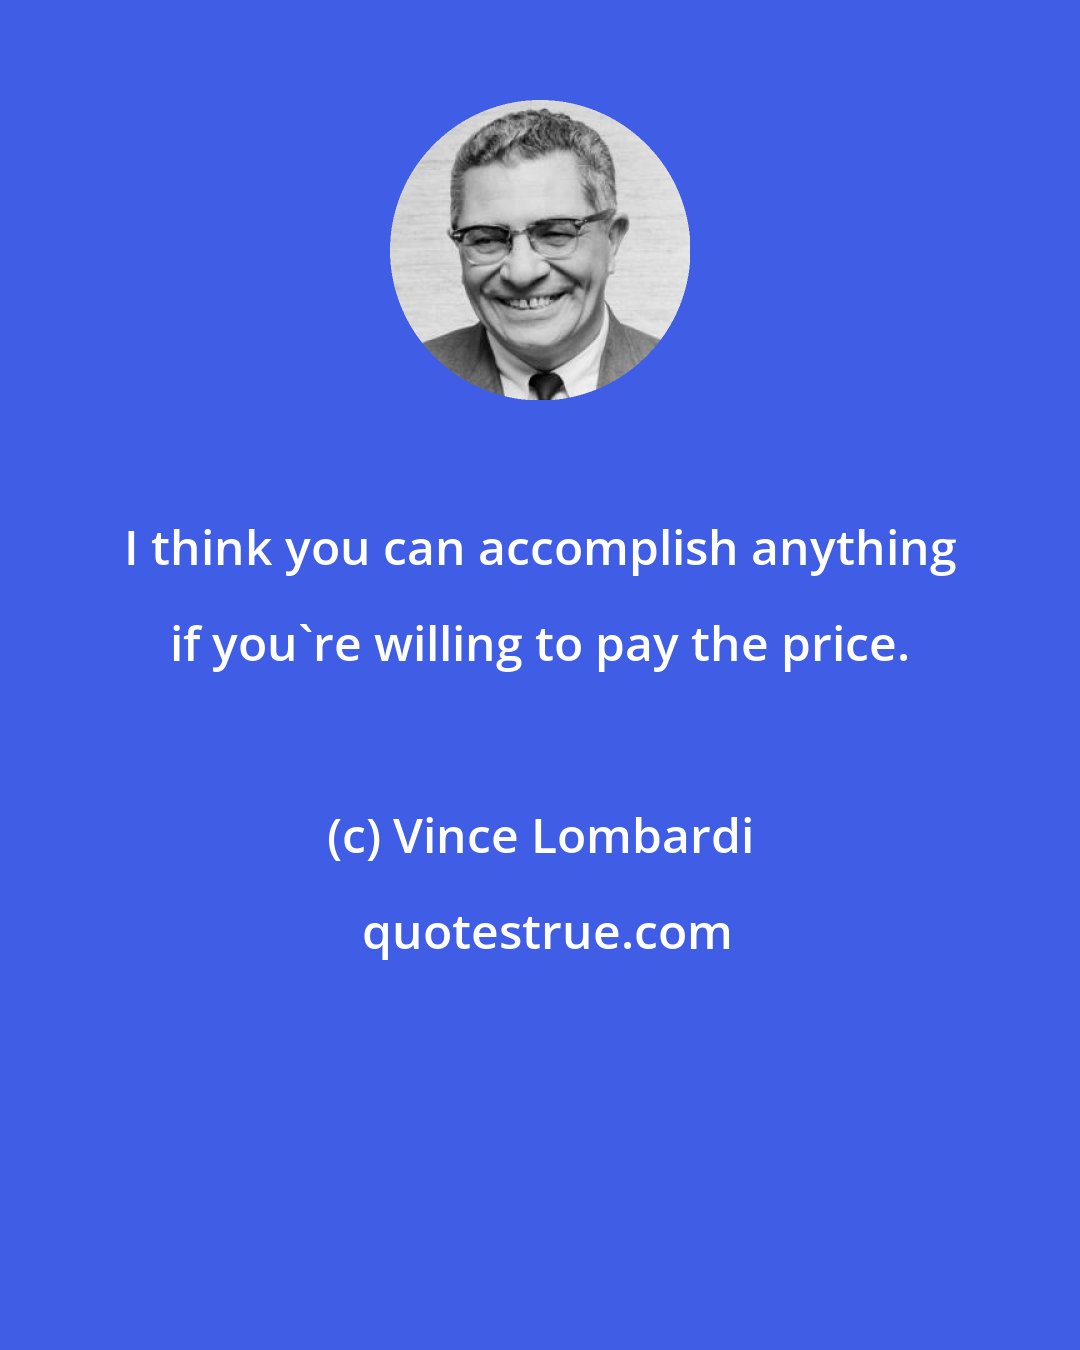 Vince Lombardi: I think you can accomplish anything if you're willing to pay the price.